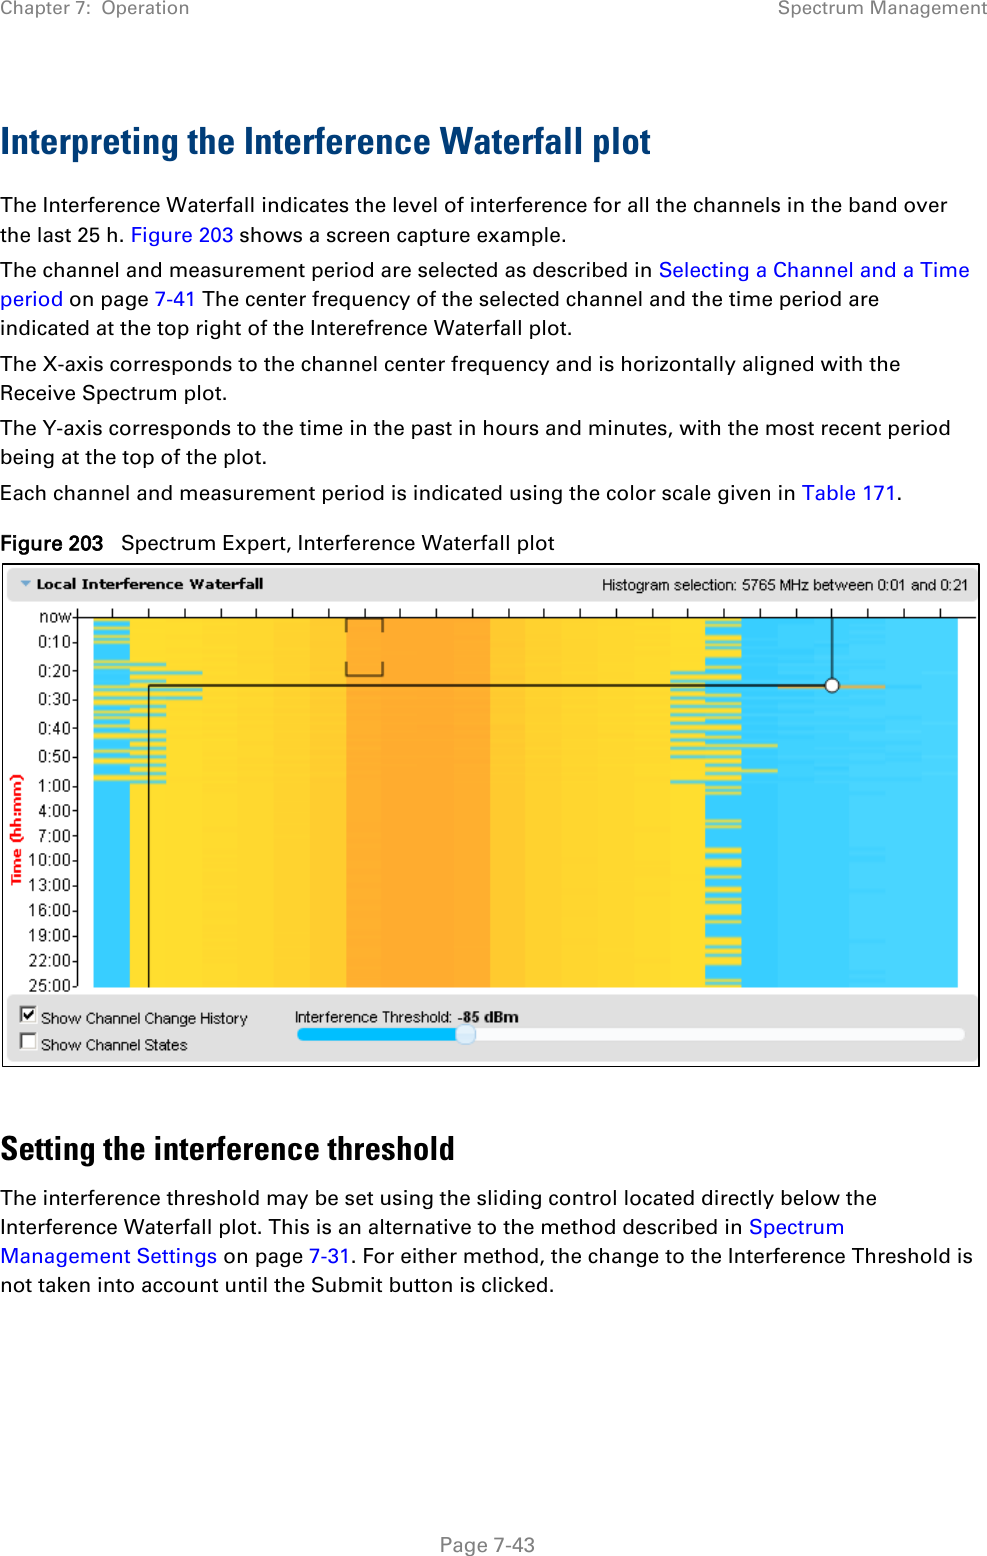 Chapter 7:  Operation Spectrum Management  Interpreting the Interference Waterfall plot The Interference Waterfall indicates the level of interference for all the channels in the band over the last 25 h. Figure 203 shows a screen capture example. The channel and measurement period are selected as described in Selecting a Channel and a Time period on page 7-41 The center frequency of the selected channel and the time period are indicated at the top right of the Interefrence Waterfall plot. The X-axis corresponds to the channel center frequency and is horizontally aligned with the Receive Spectrum plot. The Y-axis corresponds to the time in the past in hours and minutes, with the most recent period being at the top of the plot. Each channel and measurement period is indicated using the color scale given in Table 171. Figure 203   Spectrum Expert, Interference Waterfall plot   Setting the interference threshold The interference threshold may be set using the sliding control located directly below the Interference Waterfall plot. This is an alternative to the method described in Spectrum Management Settings on page 7-31. For either method, the change to the Interference Threshold is not taken into account until the Submit button is clicked.     Page 7-43 